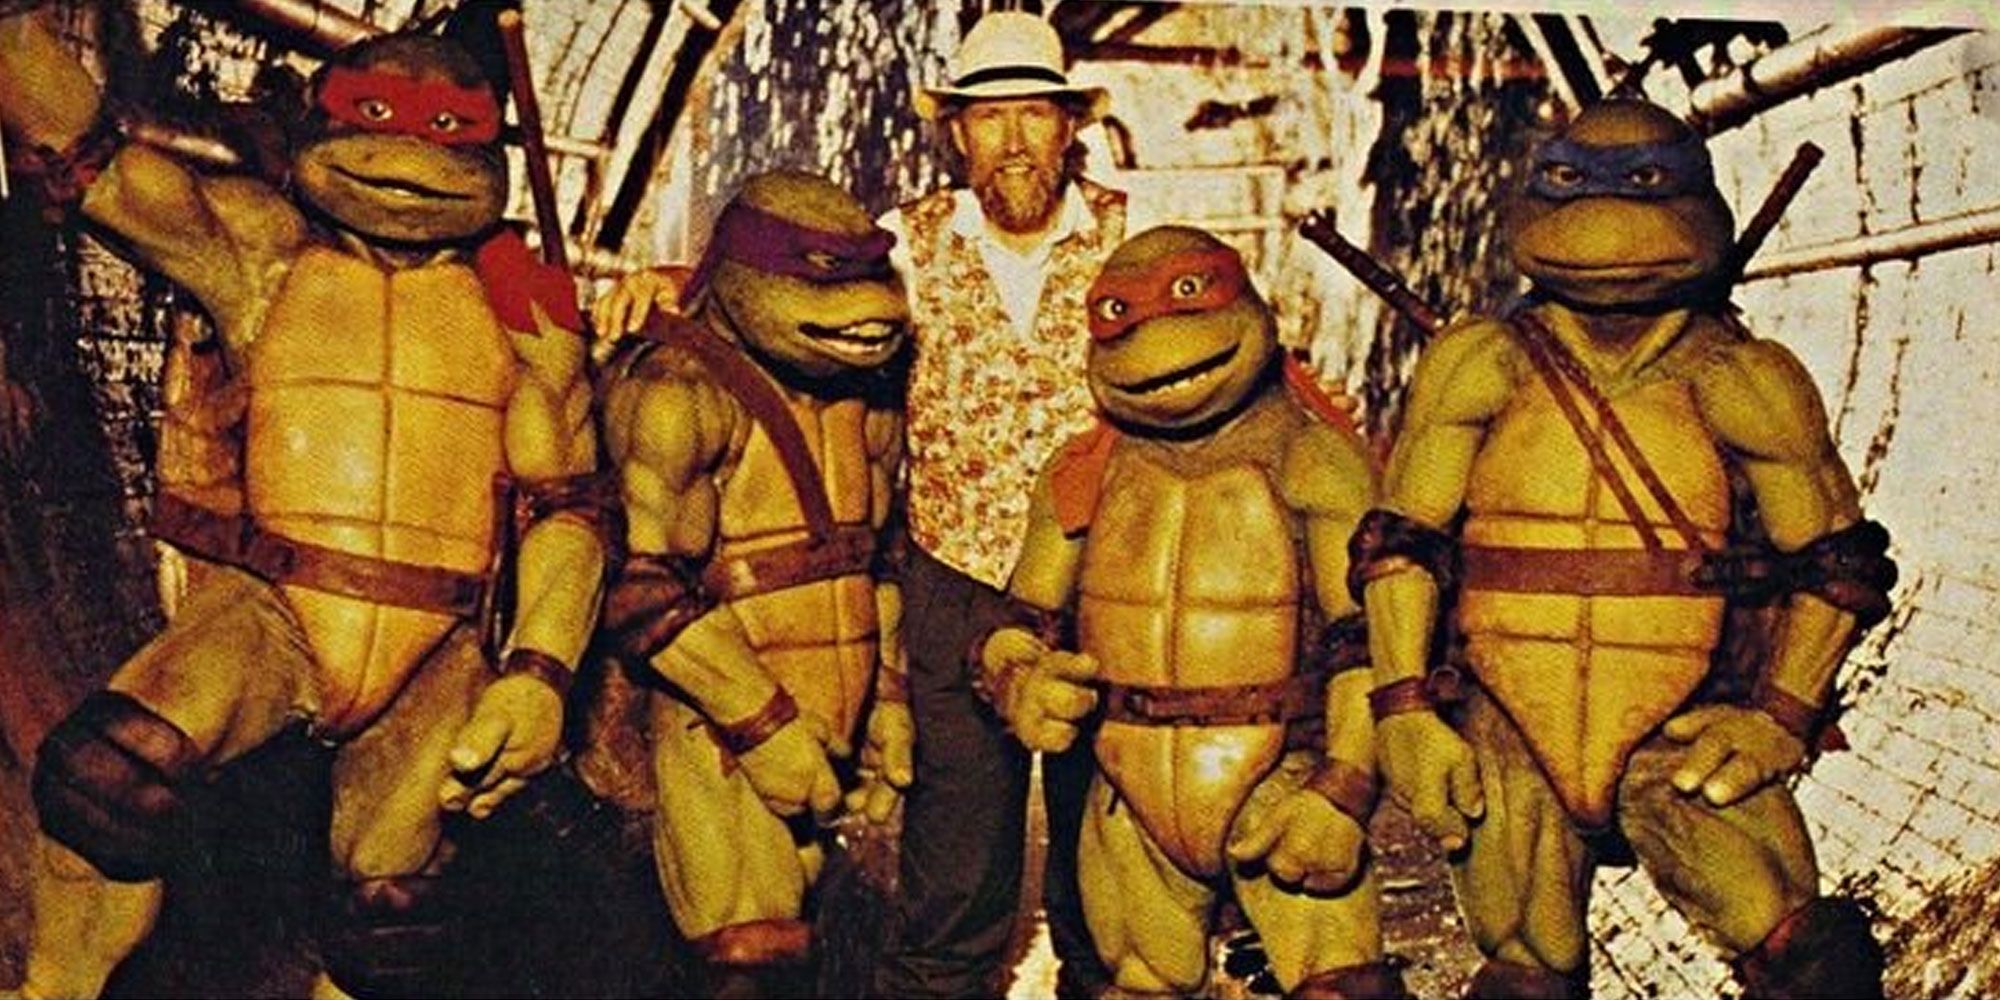 Jim Henson stands with the original live action Ninja Turtles in costume